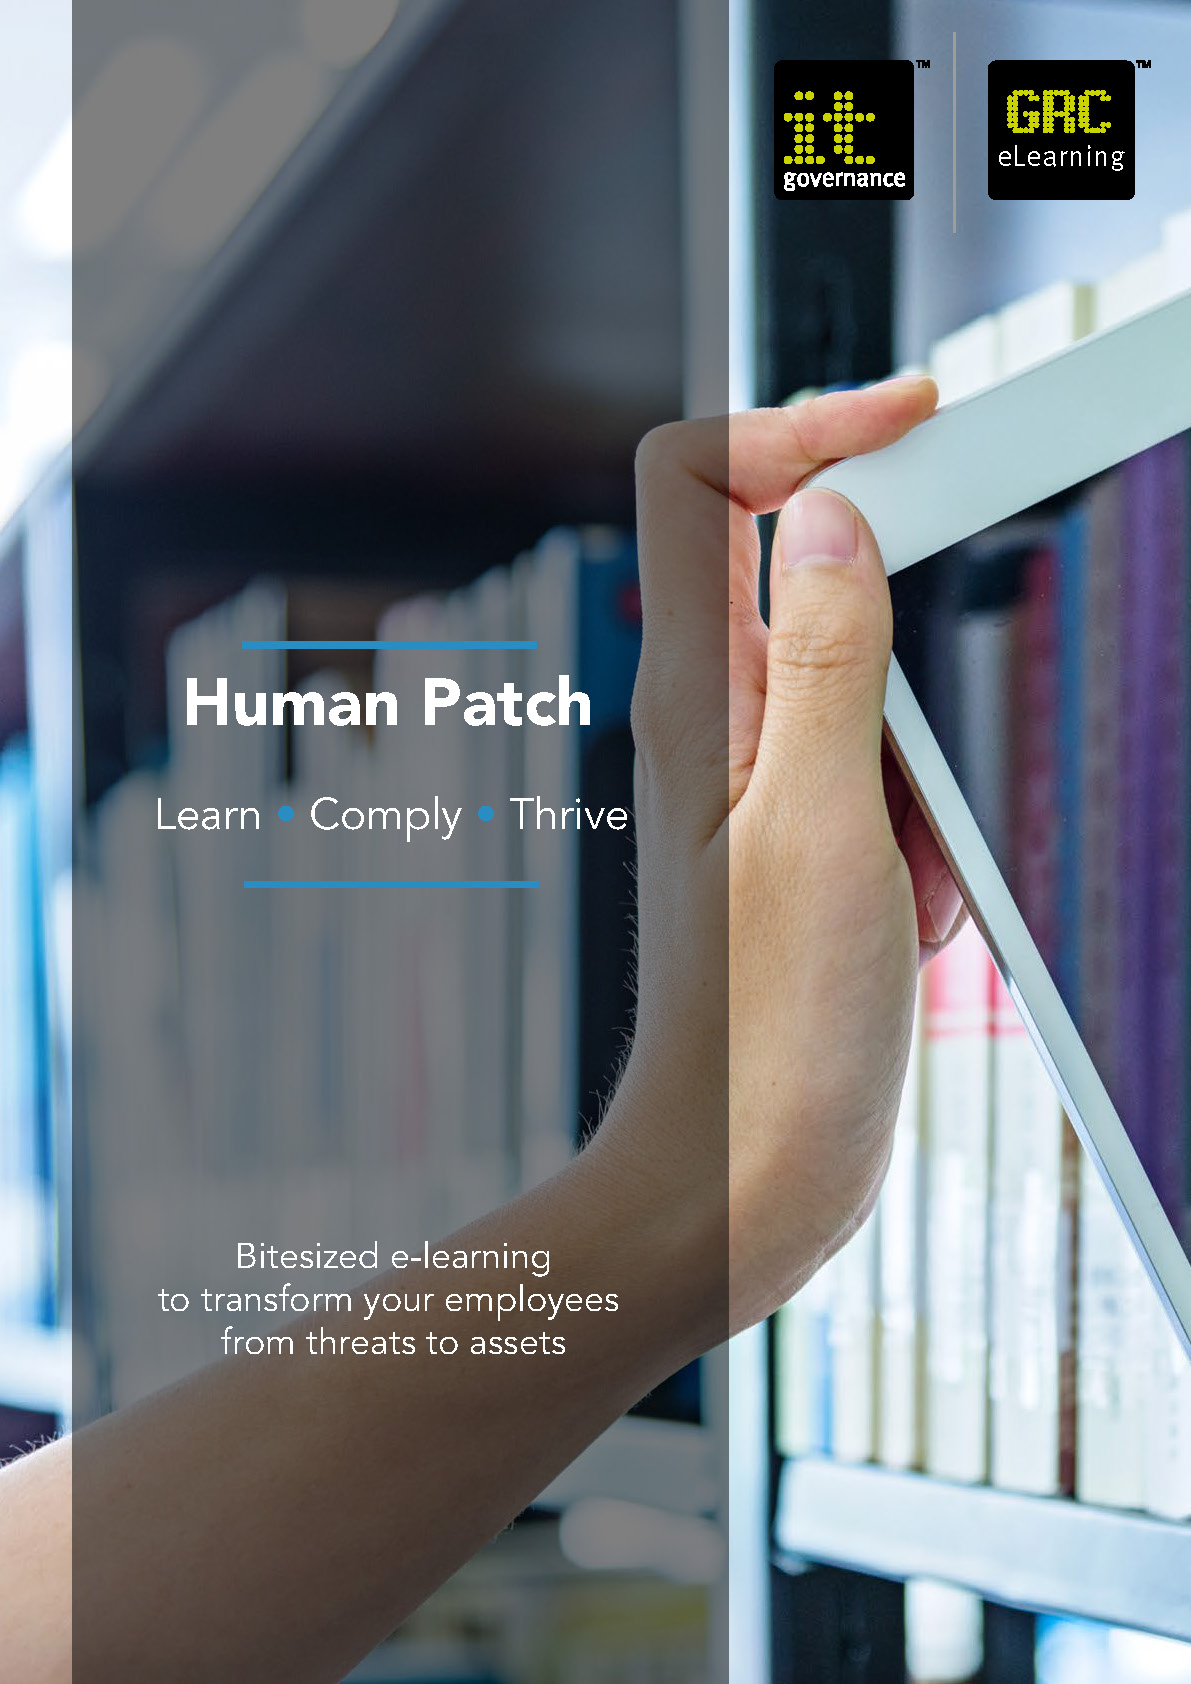 Human Patch – Bitesized e-learning to transform your employees from threats to assets